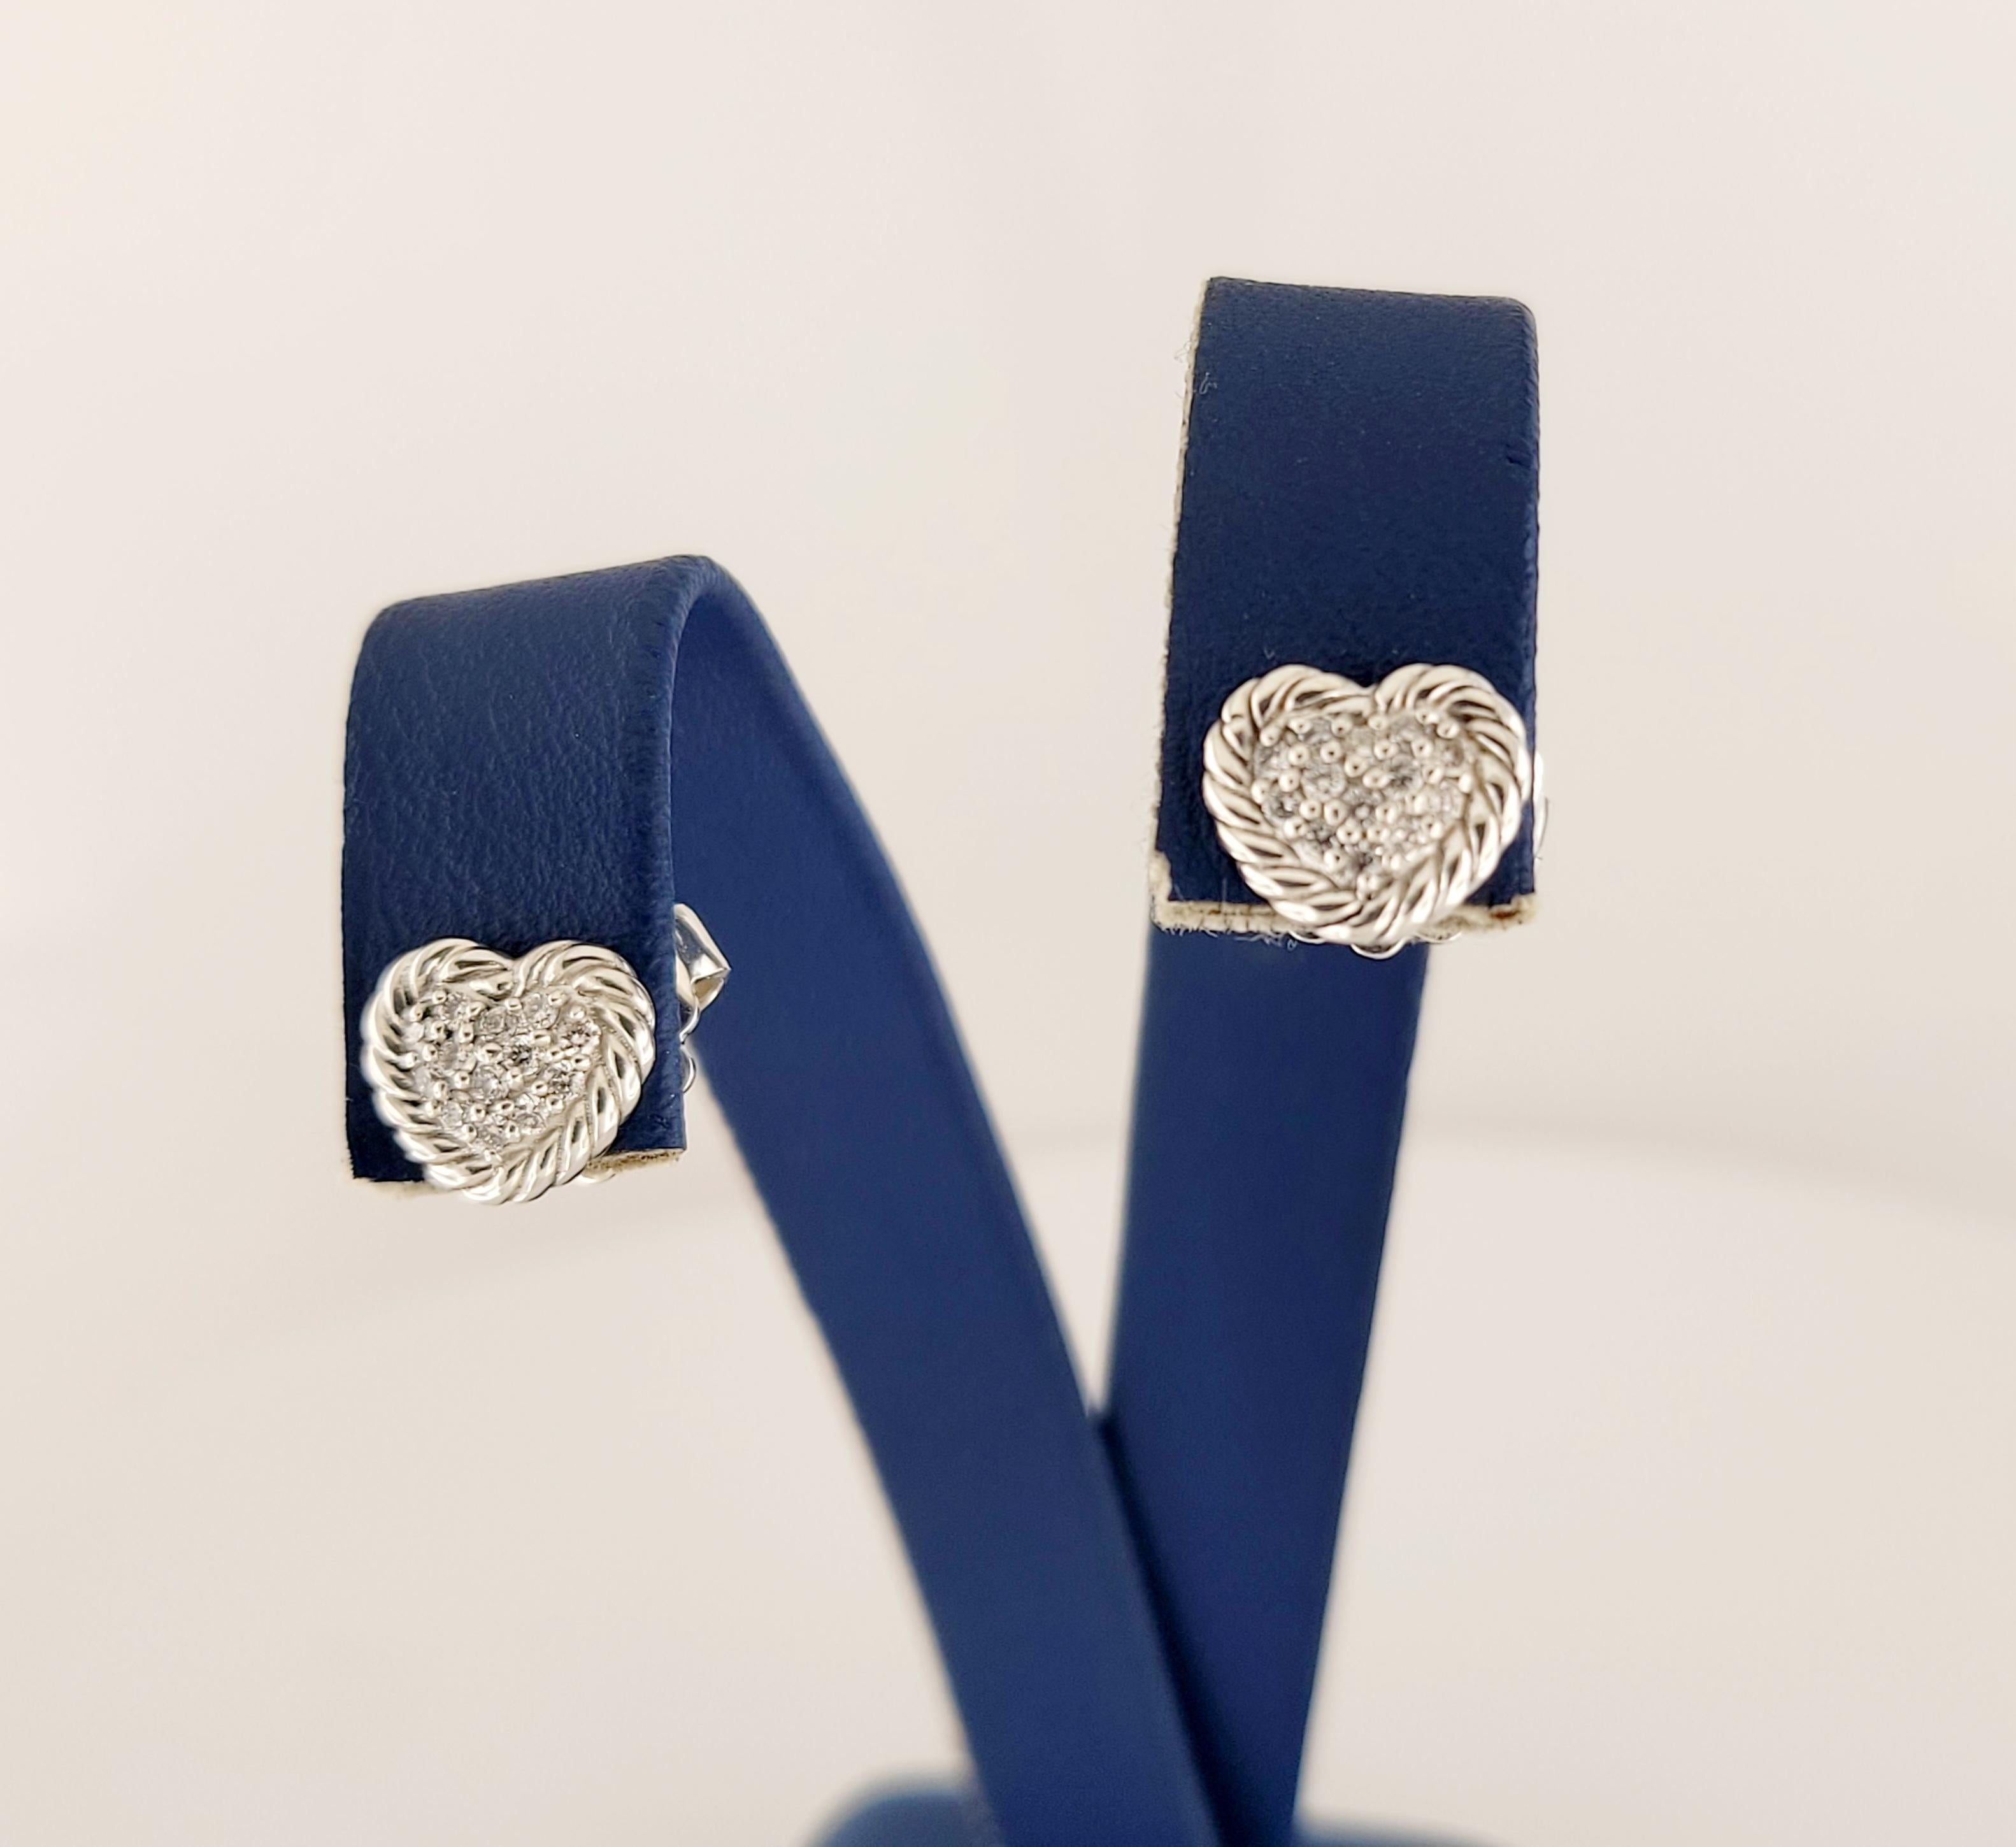 Brand David Yurman
Sterling Silver 925
Earring shape Heart
Main stone Diamond
Weight 2.6gr Total 
Diamonds Pave Setting estimated 0.03ct-0.08cts
Condition New, never worn
Comes with David Yurman  pouch